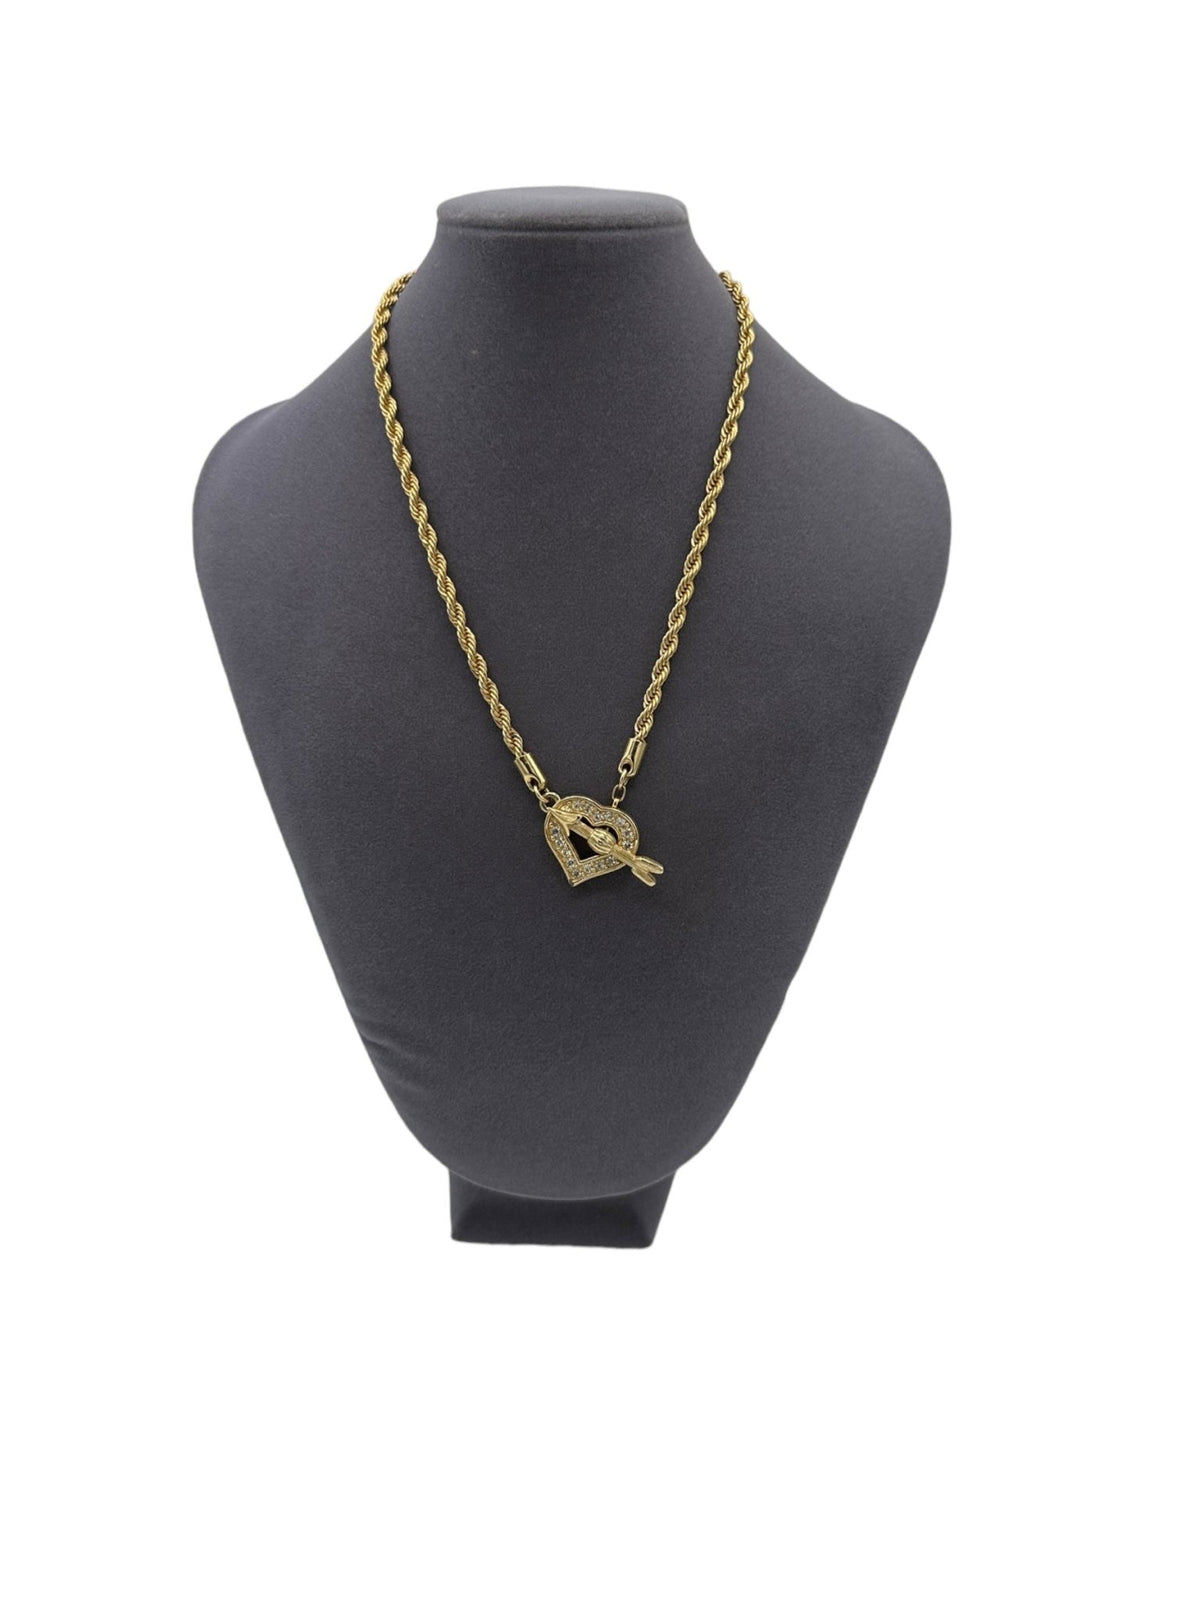 Swarovski White Crystal Open Heart Pendant Gold Rope Chain Necklace ...